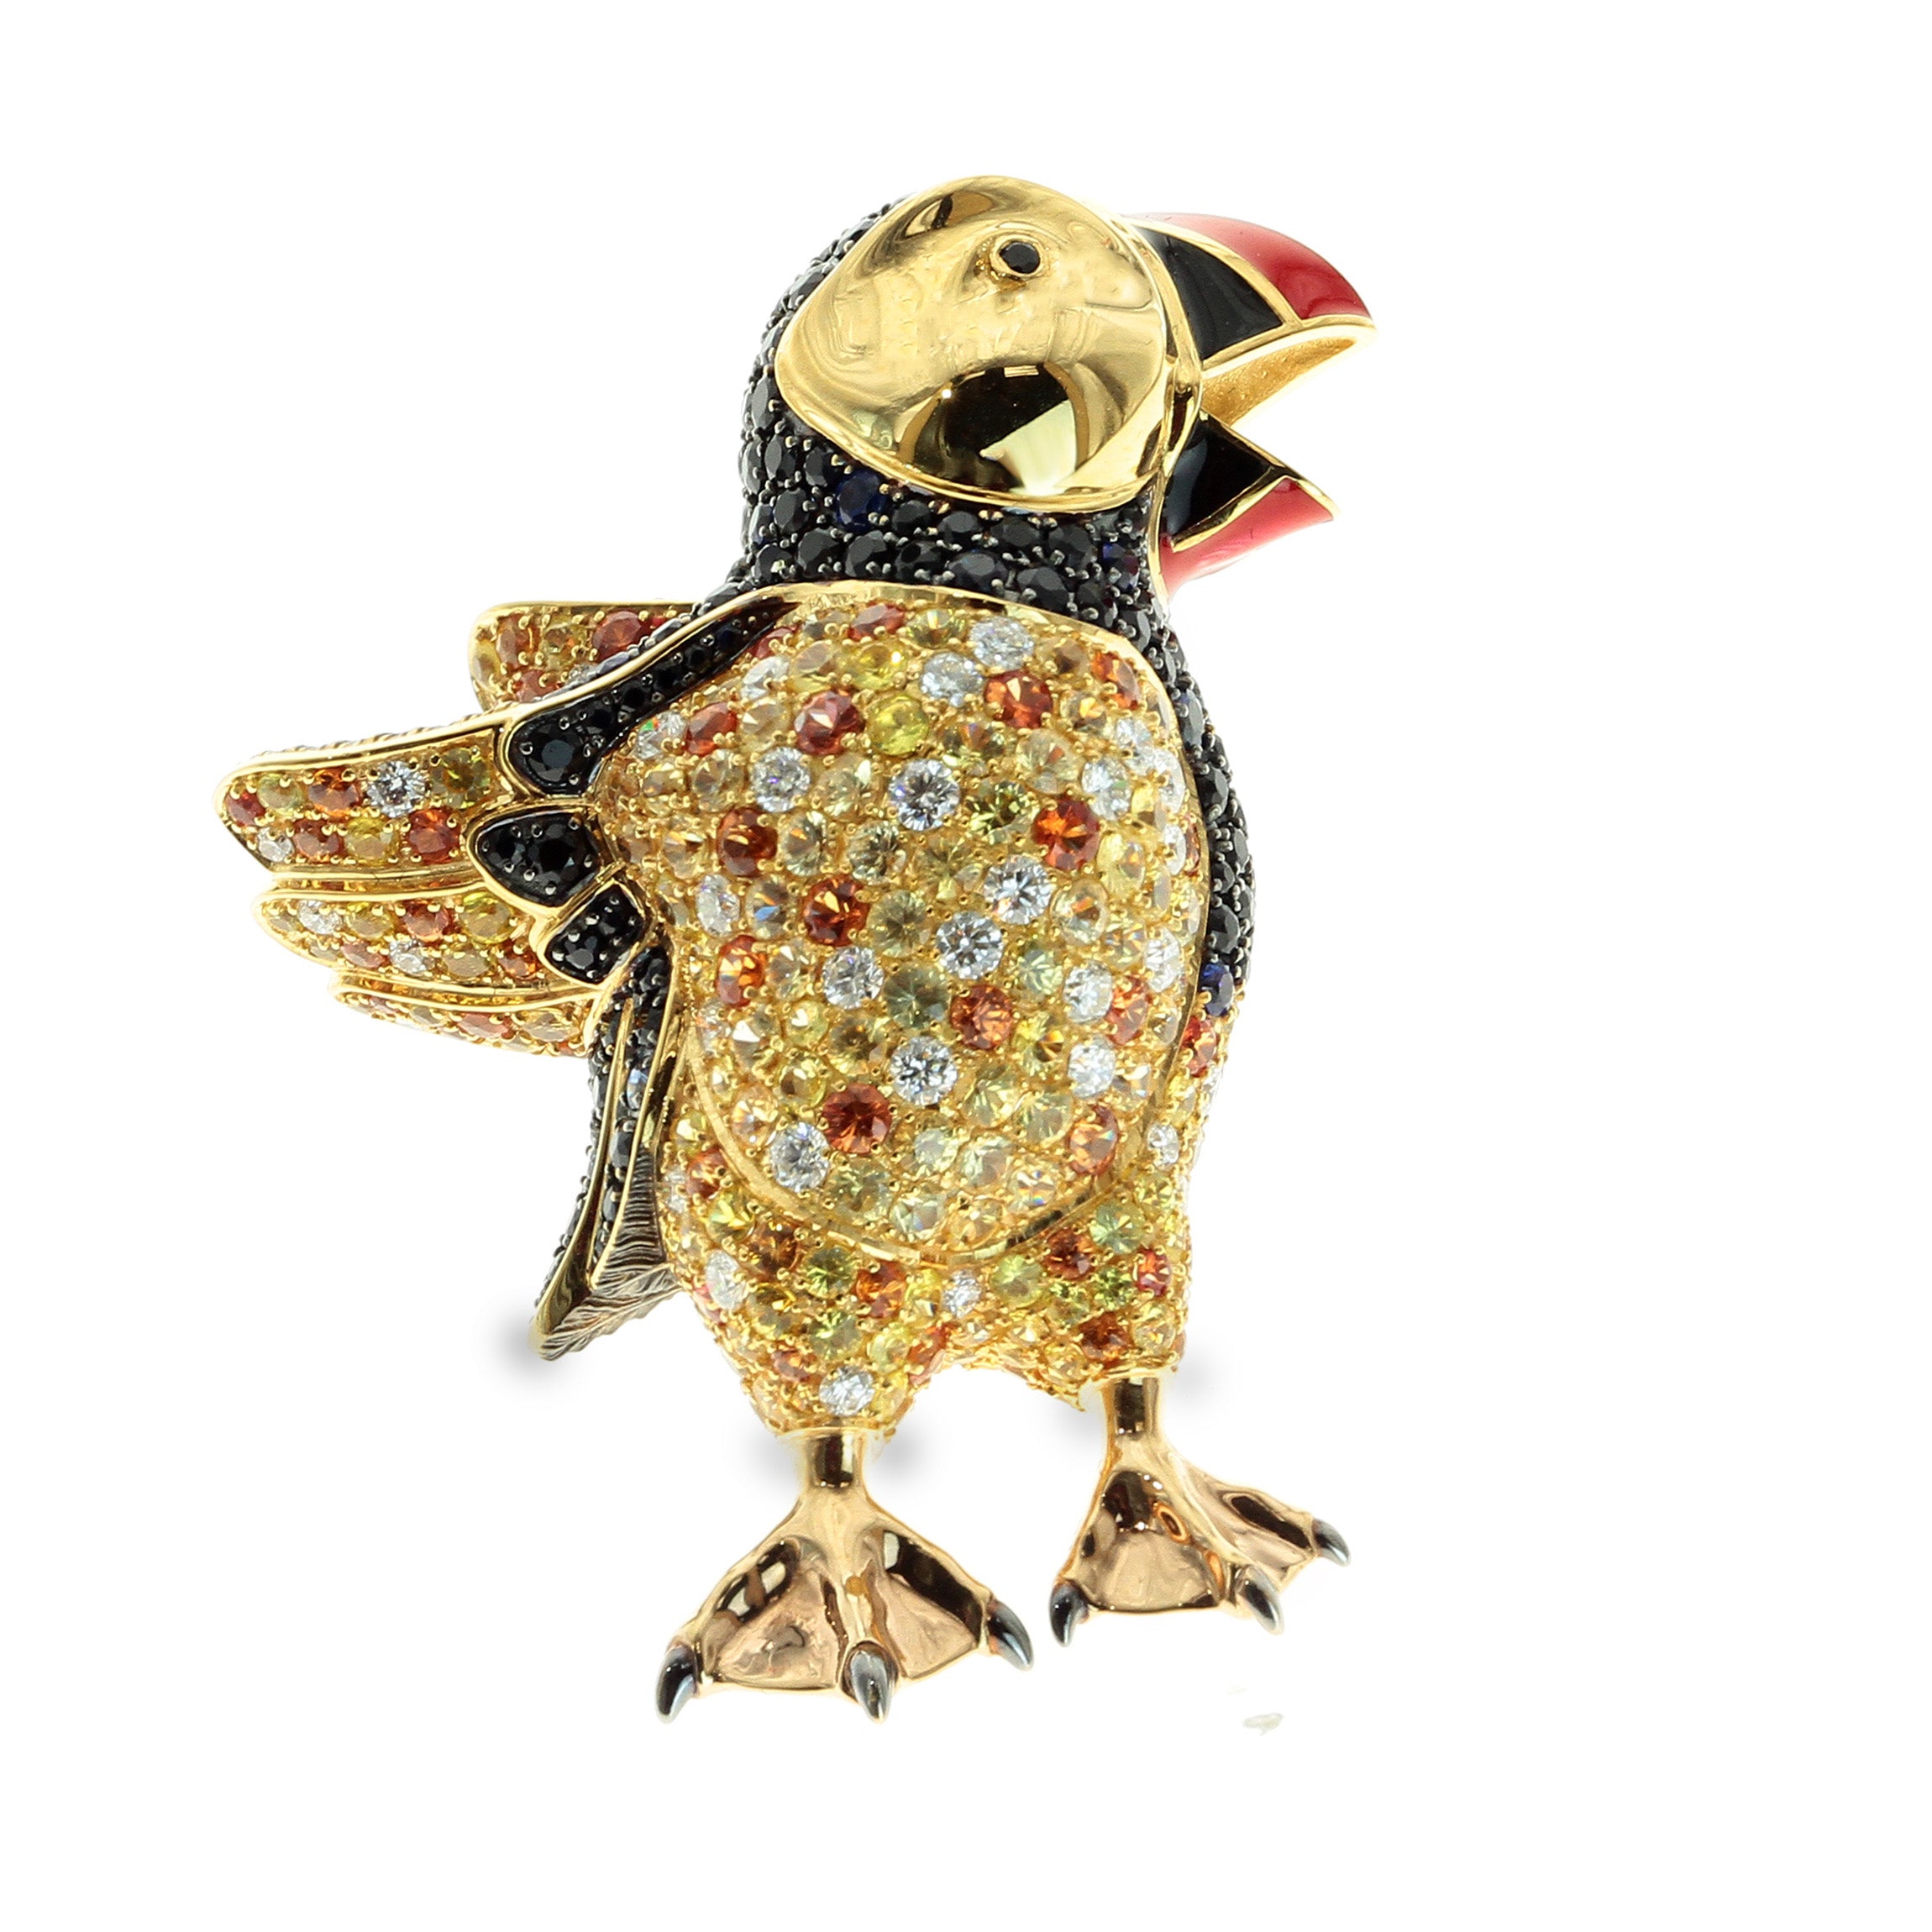 Brs 0169-1, 18K Yellow Gold, Enamel, Yellow and Orange Sapphires, Diamonds Puffin Brooch